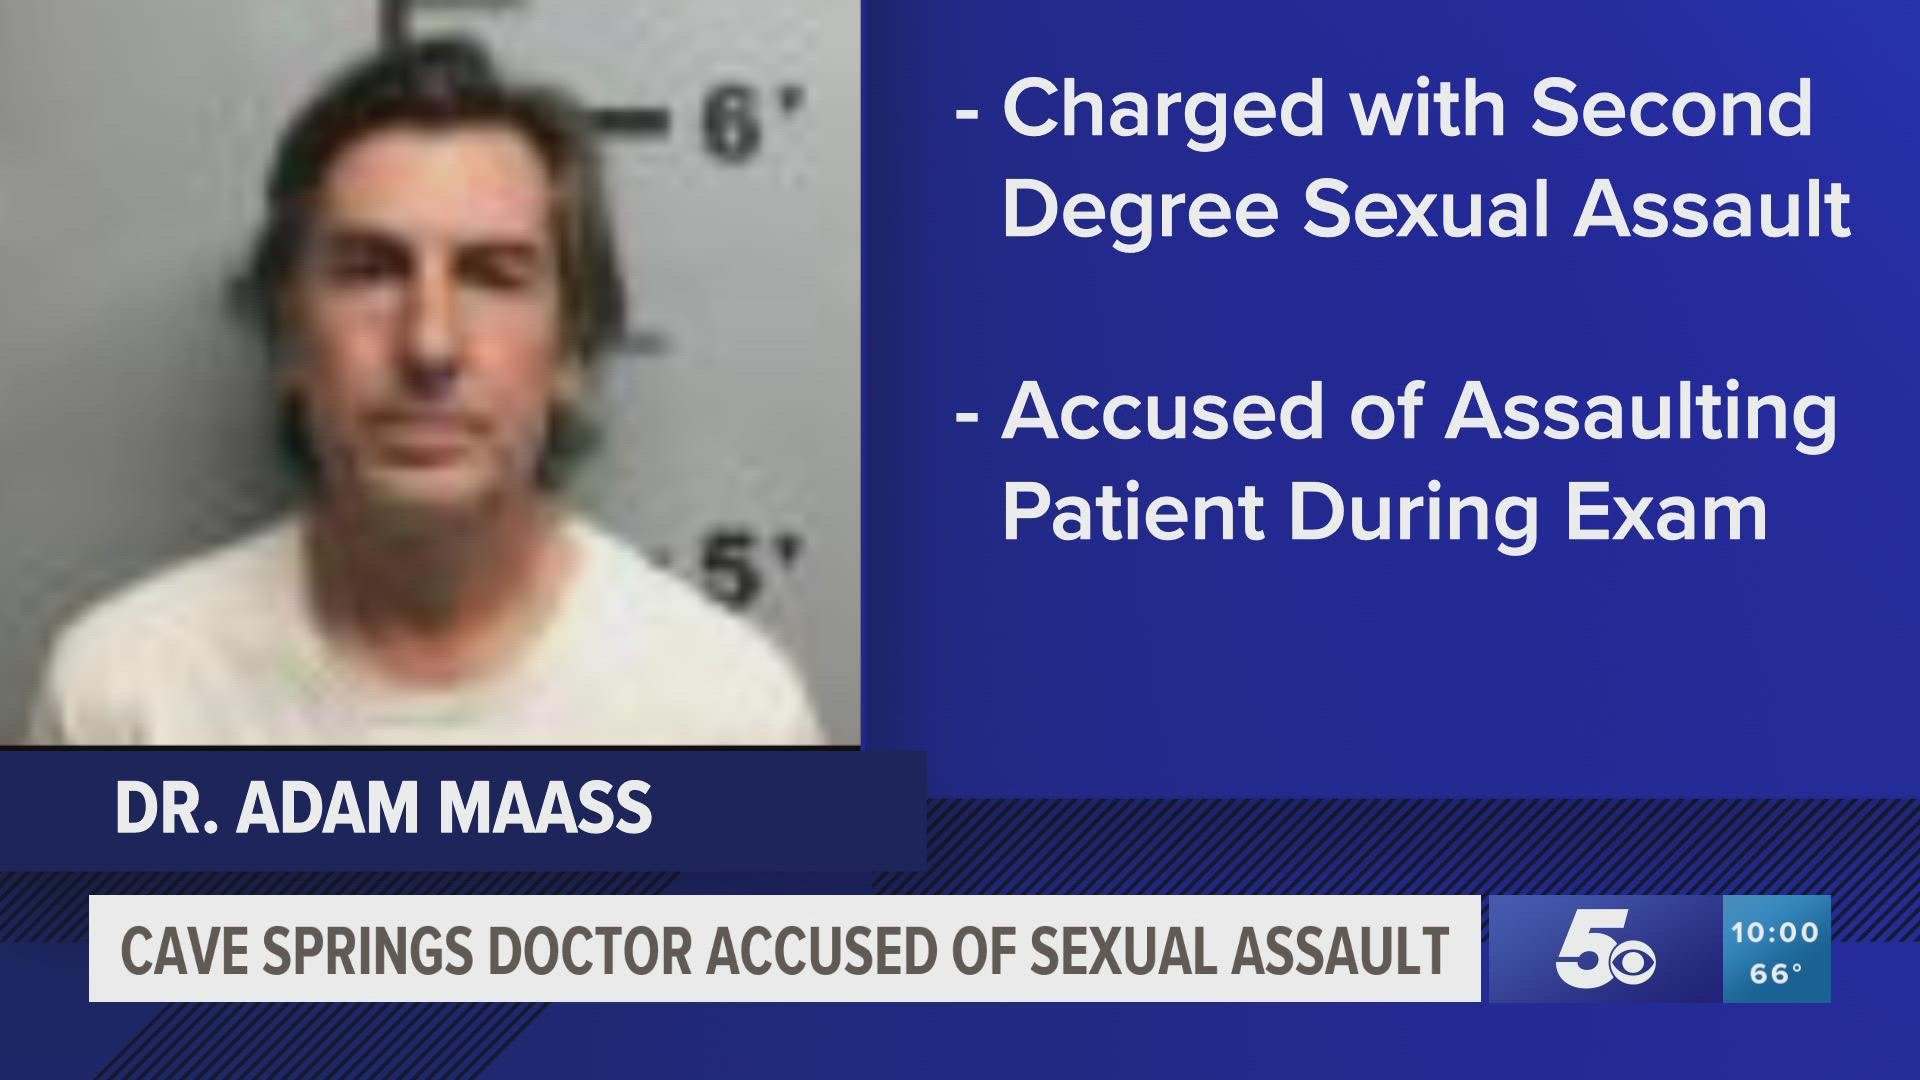 Dr. Adam Maass was booked into the Benton County jail after several sexual assault complaints were filed against him.